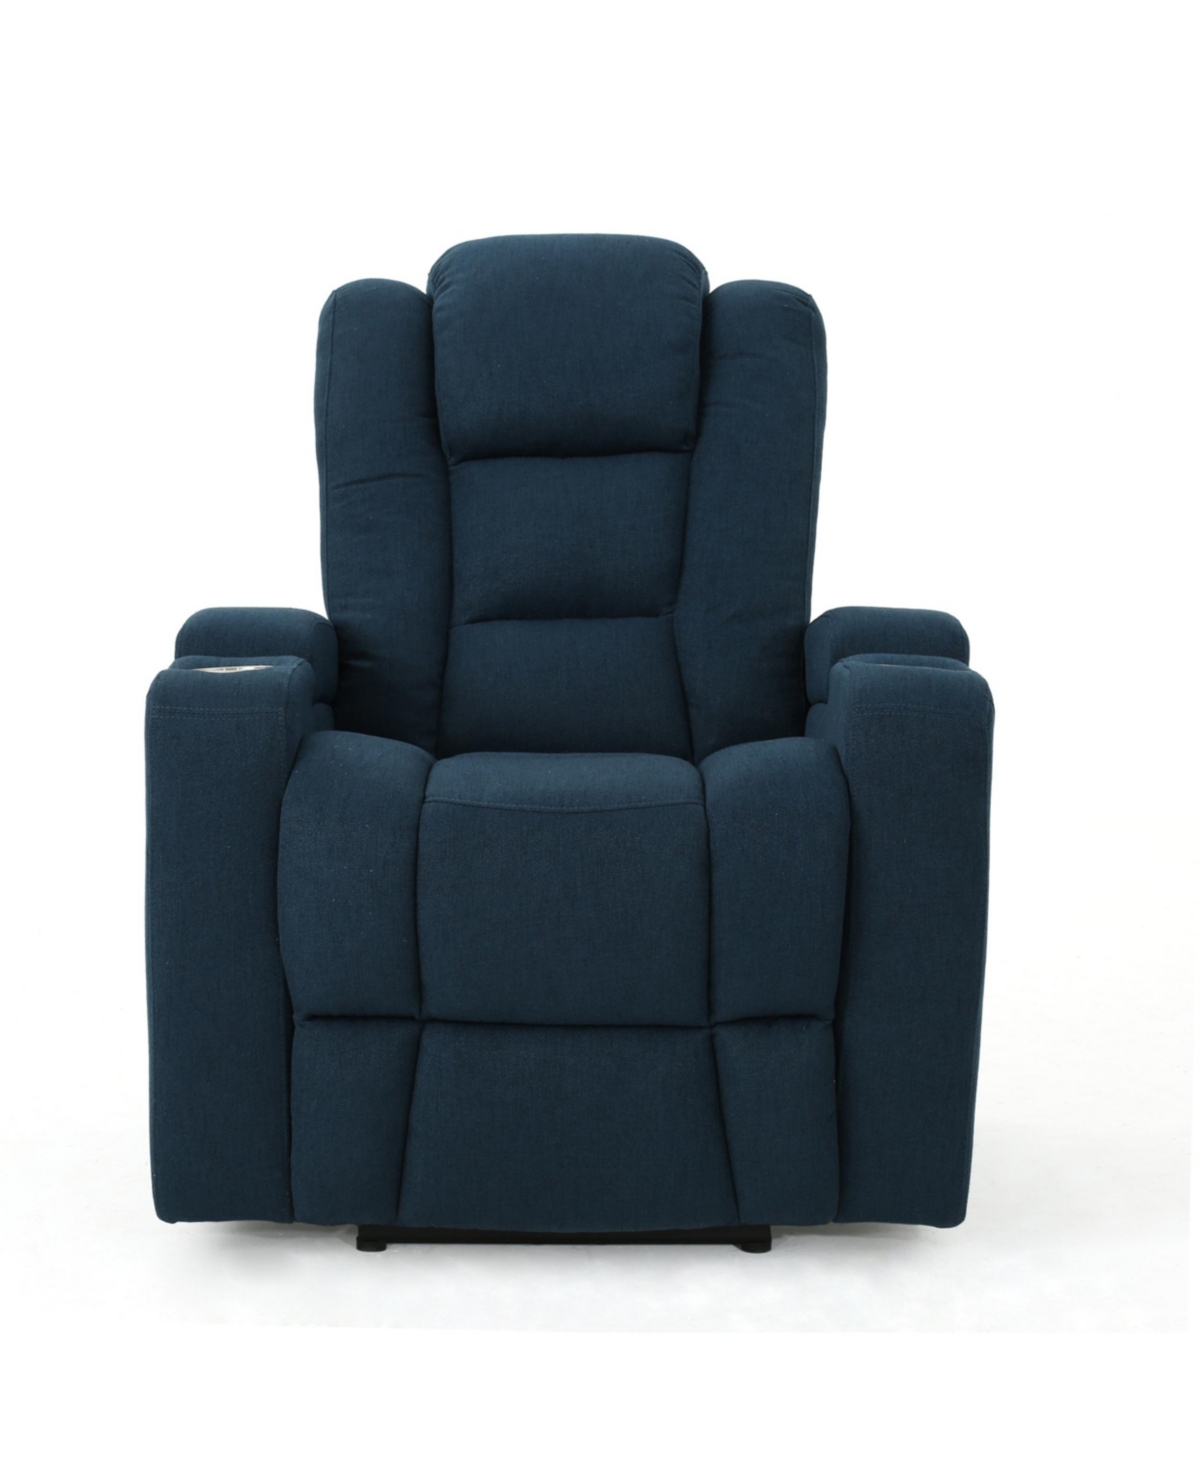 Noble House Emersyn Tufted Power Recliner In Navy Blue